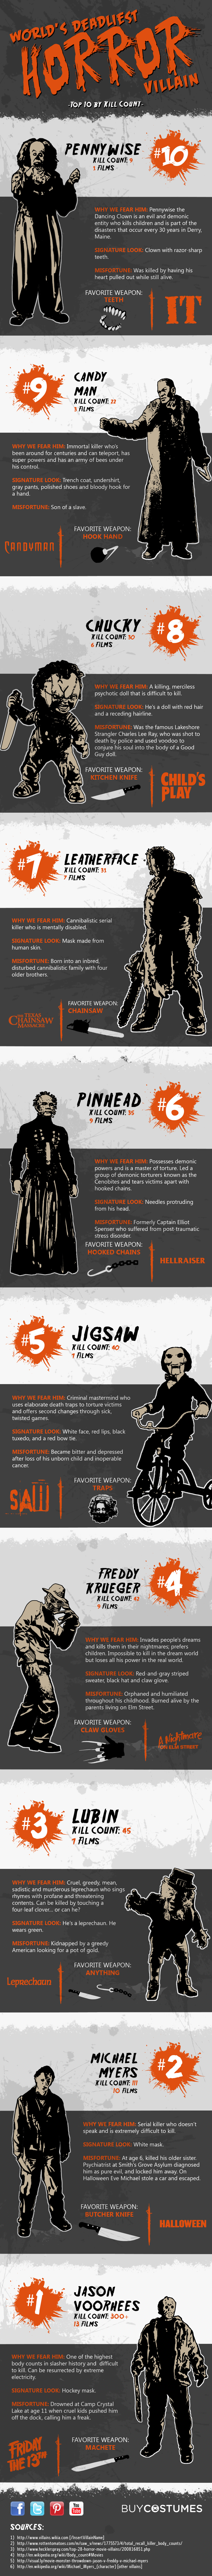 top-10-serial-killers-infographic